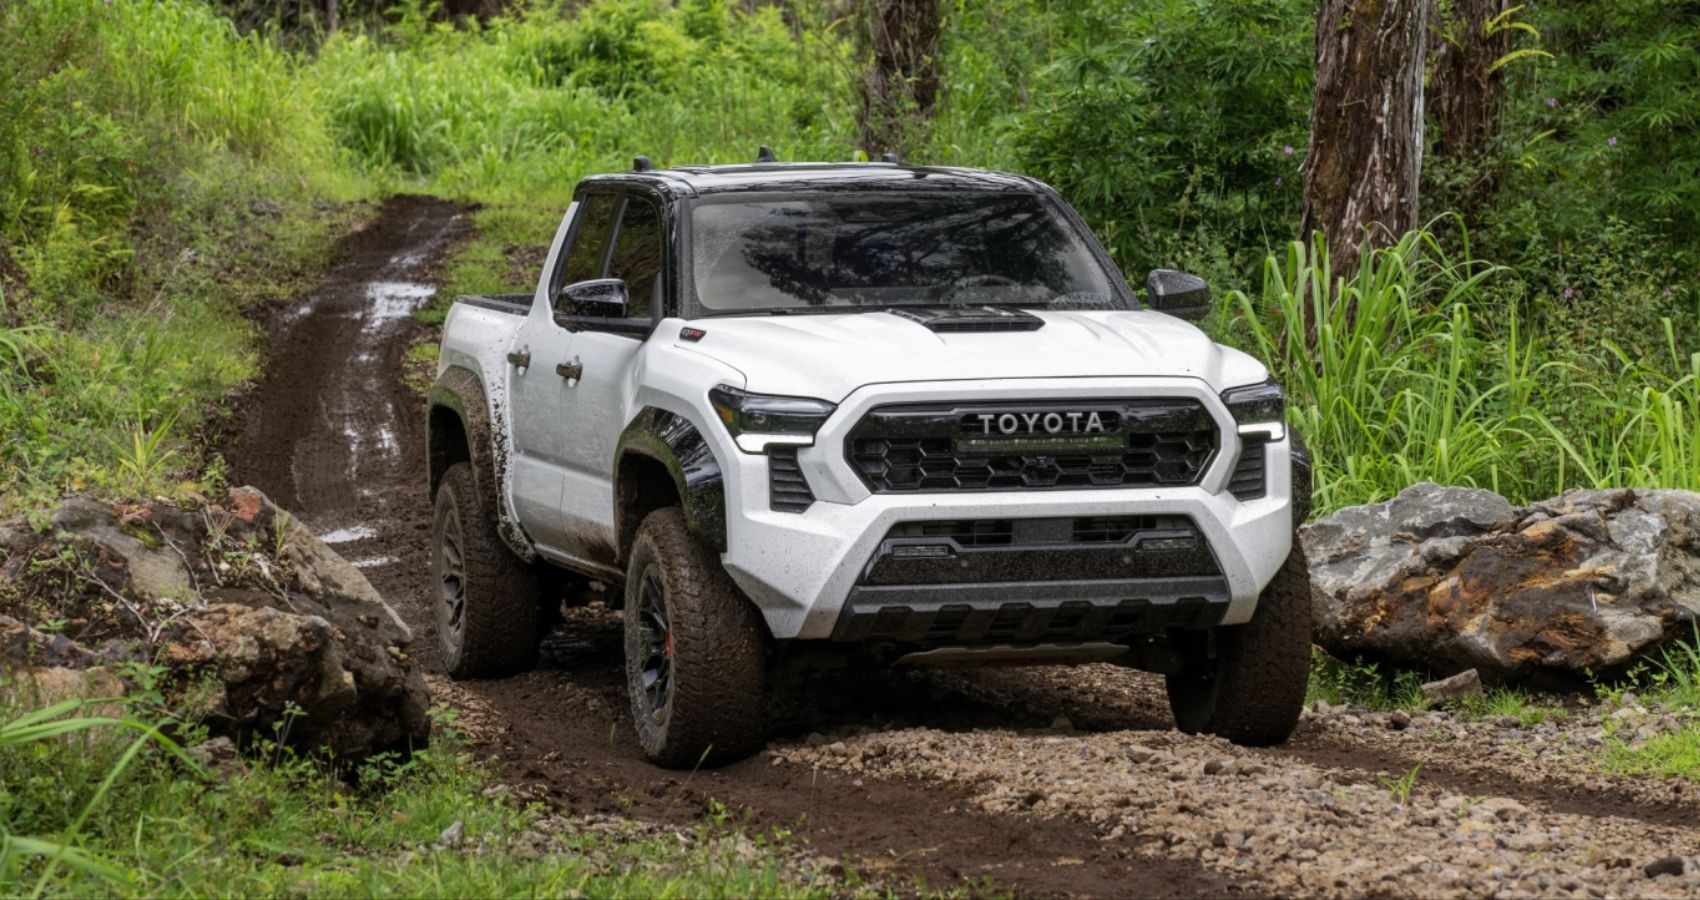 TRD OffRoad Vs TRD Pro Which Is Right For You?